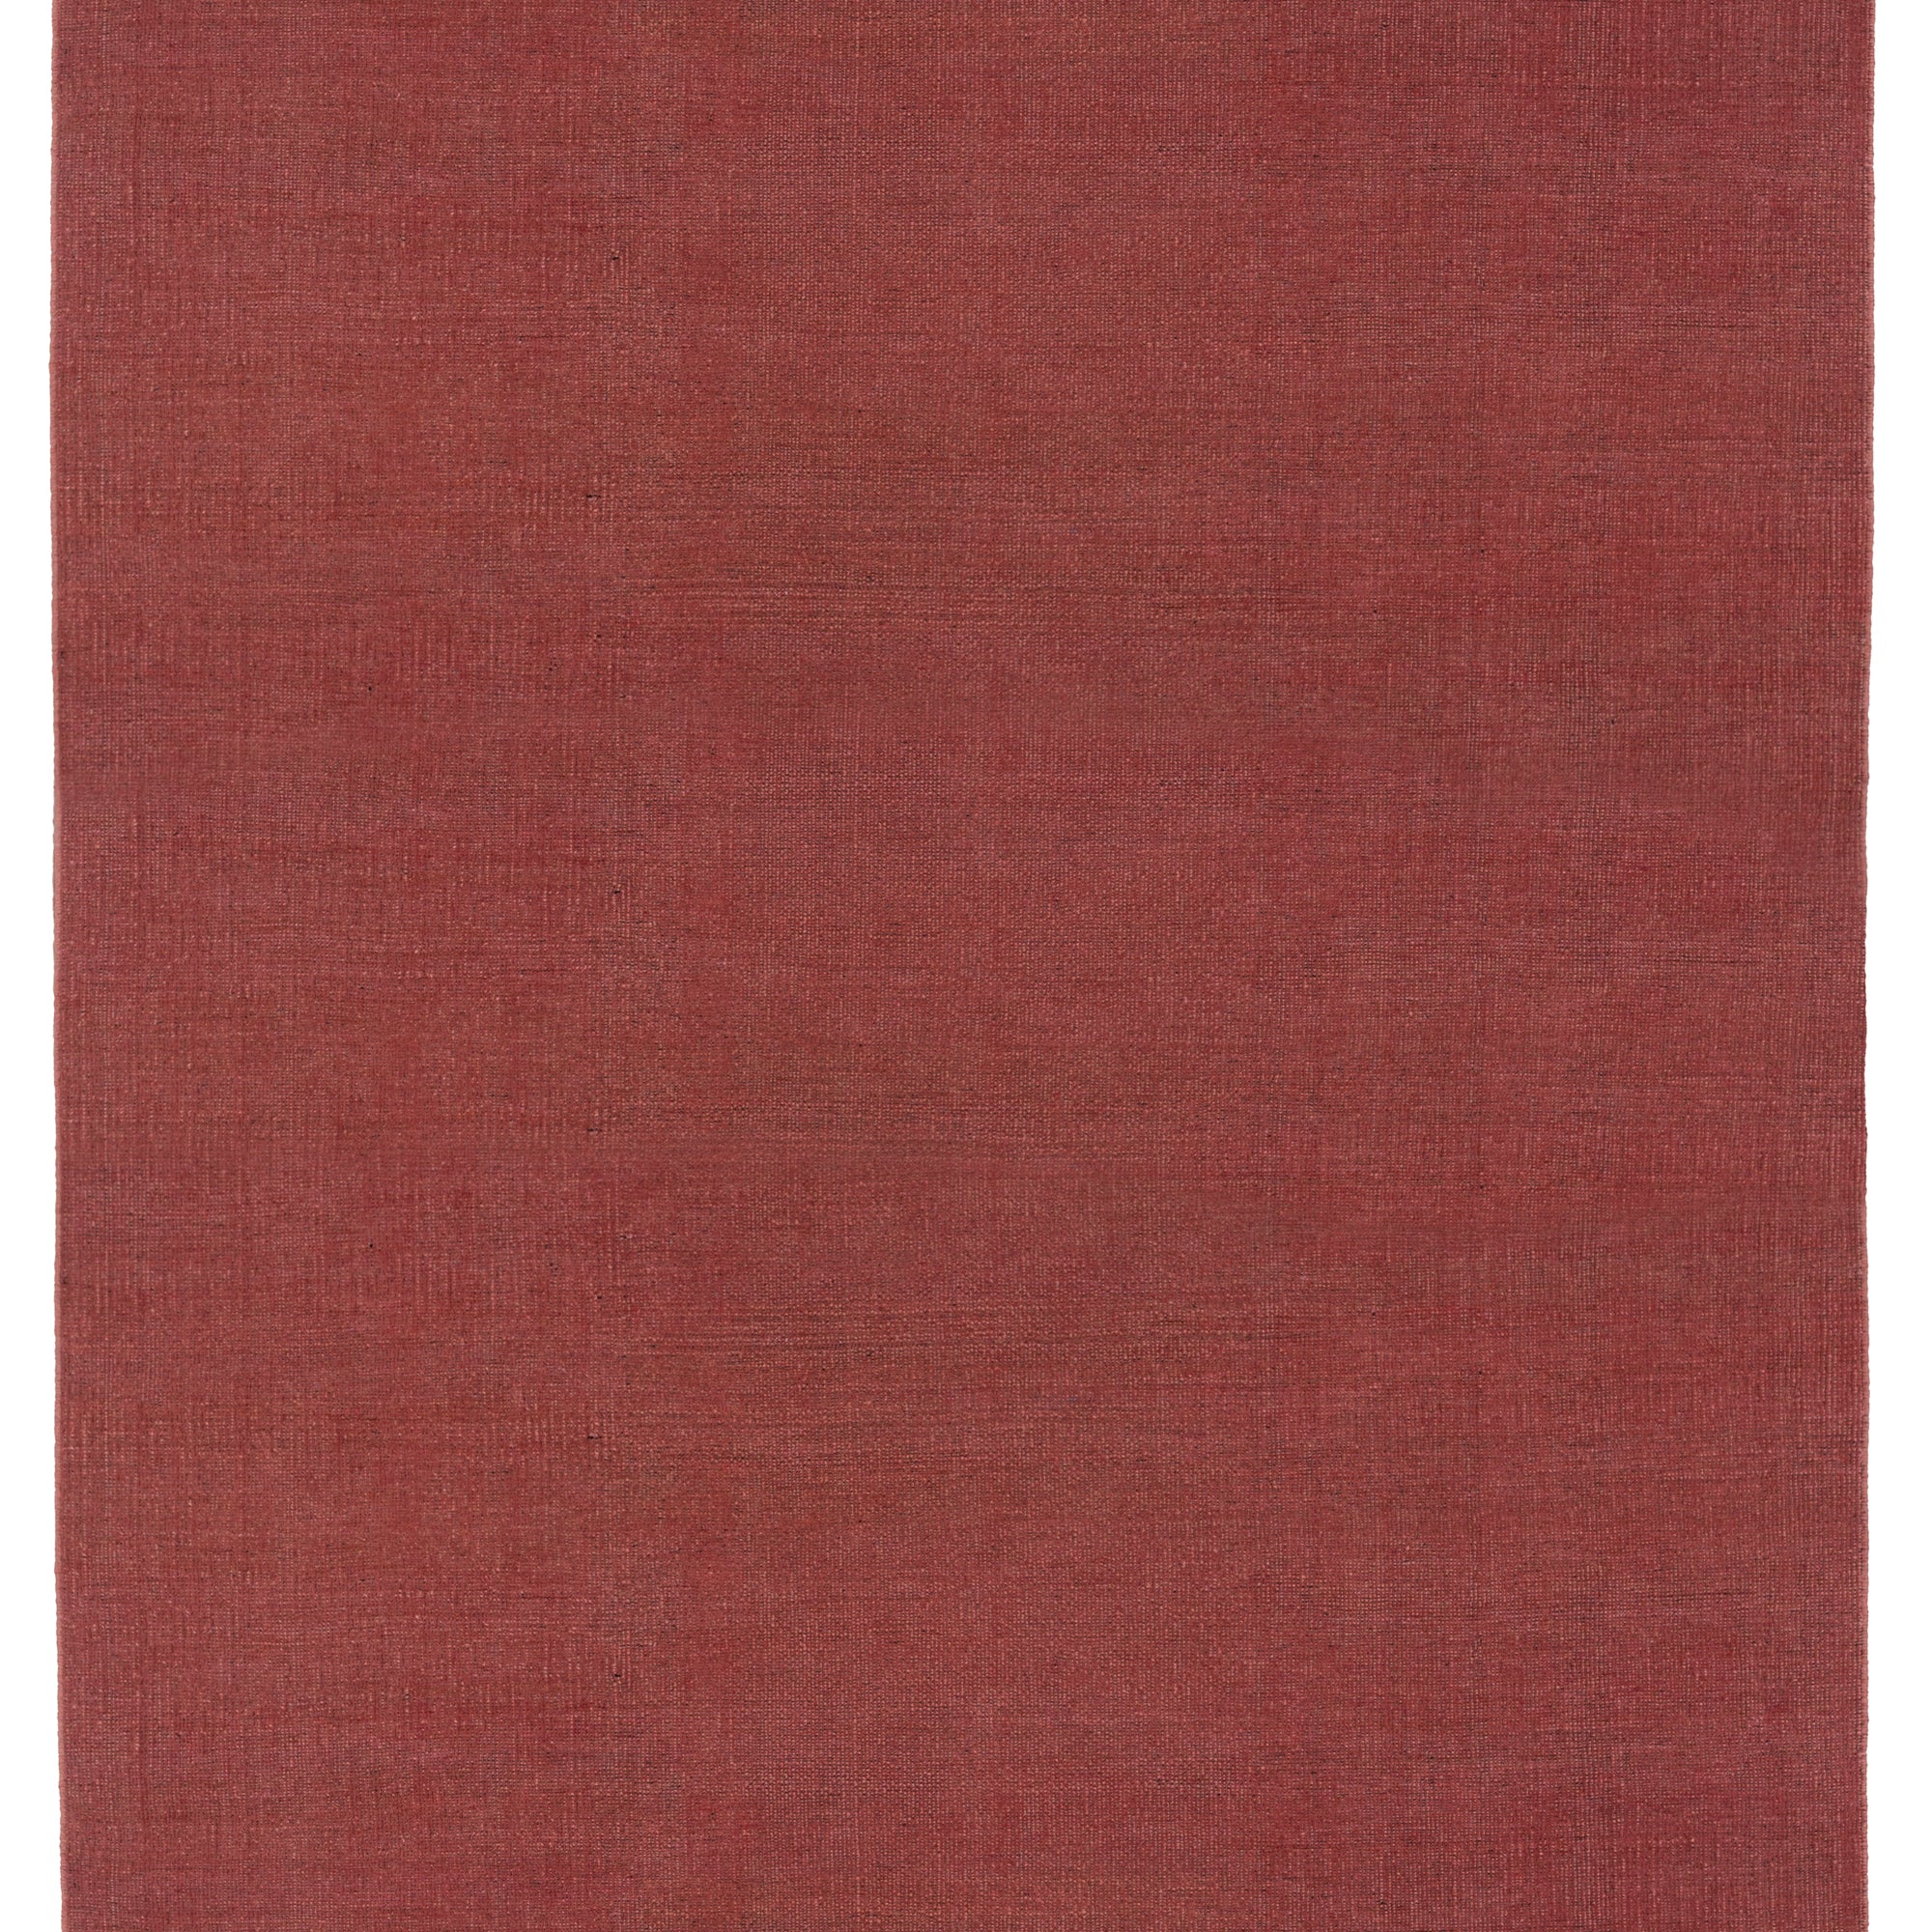 Full Size Plain Stitched Border Rug in Carmine, a solid red rug with a black border with black border with pink and taupe dashes. 